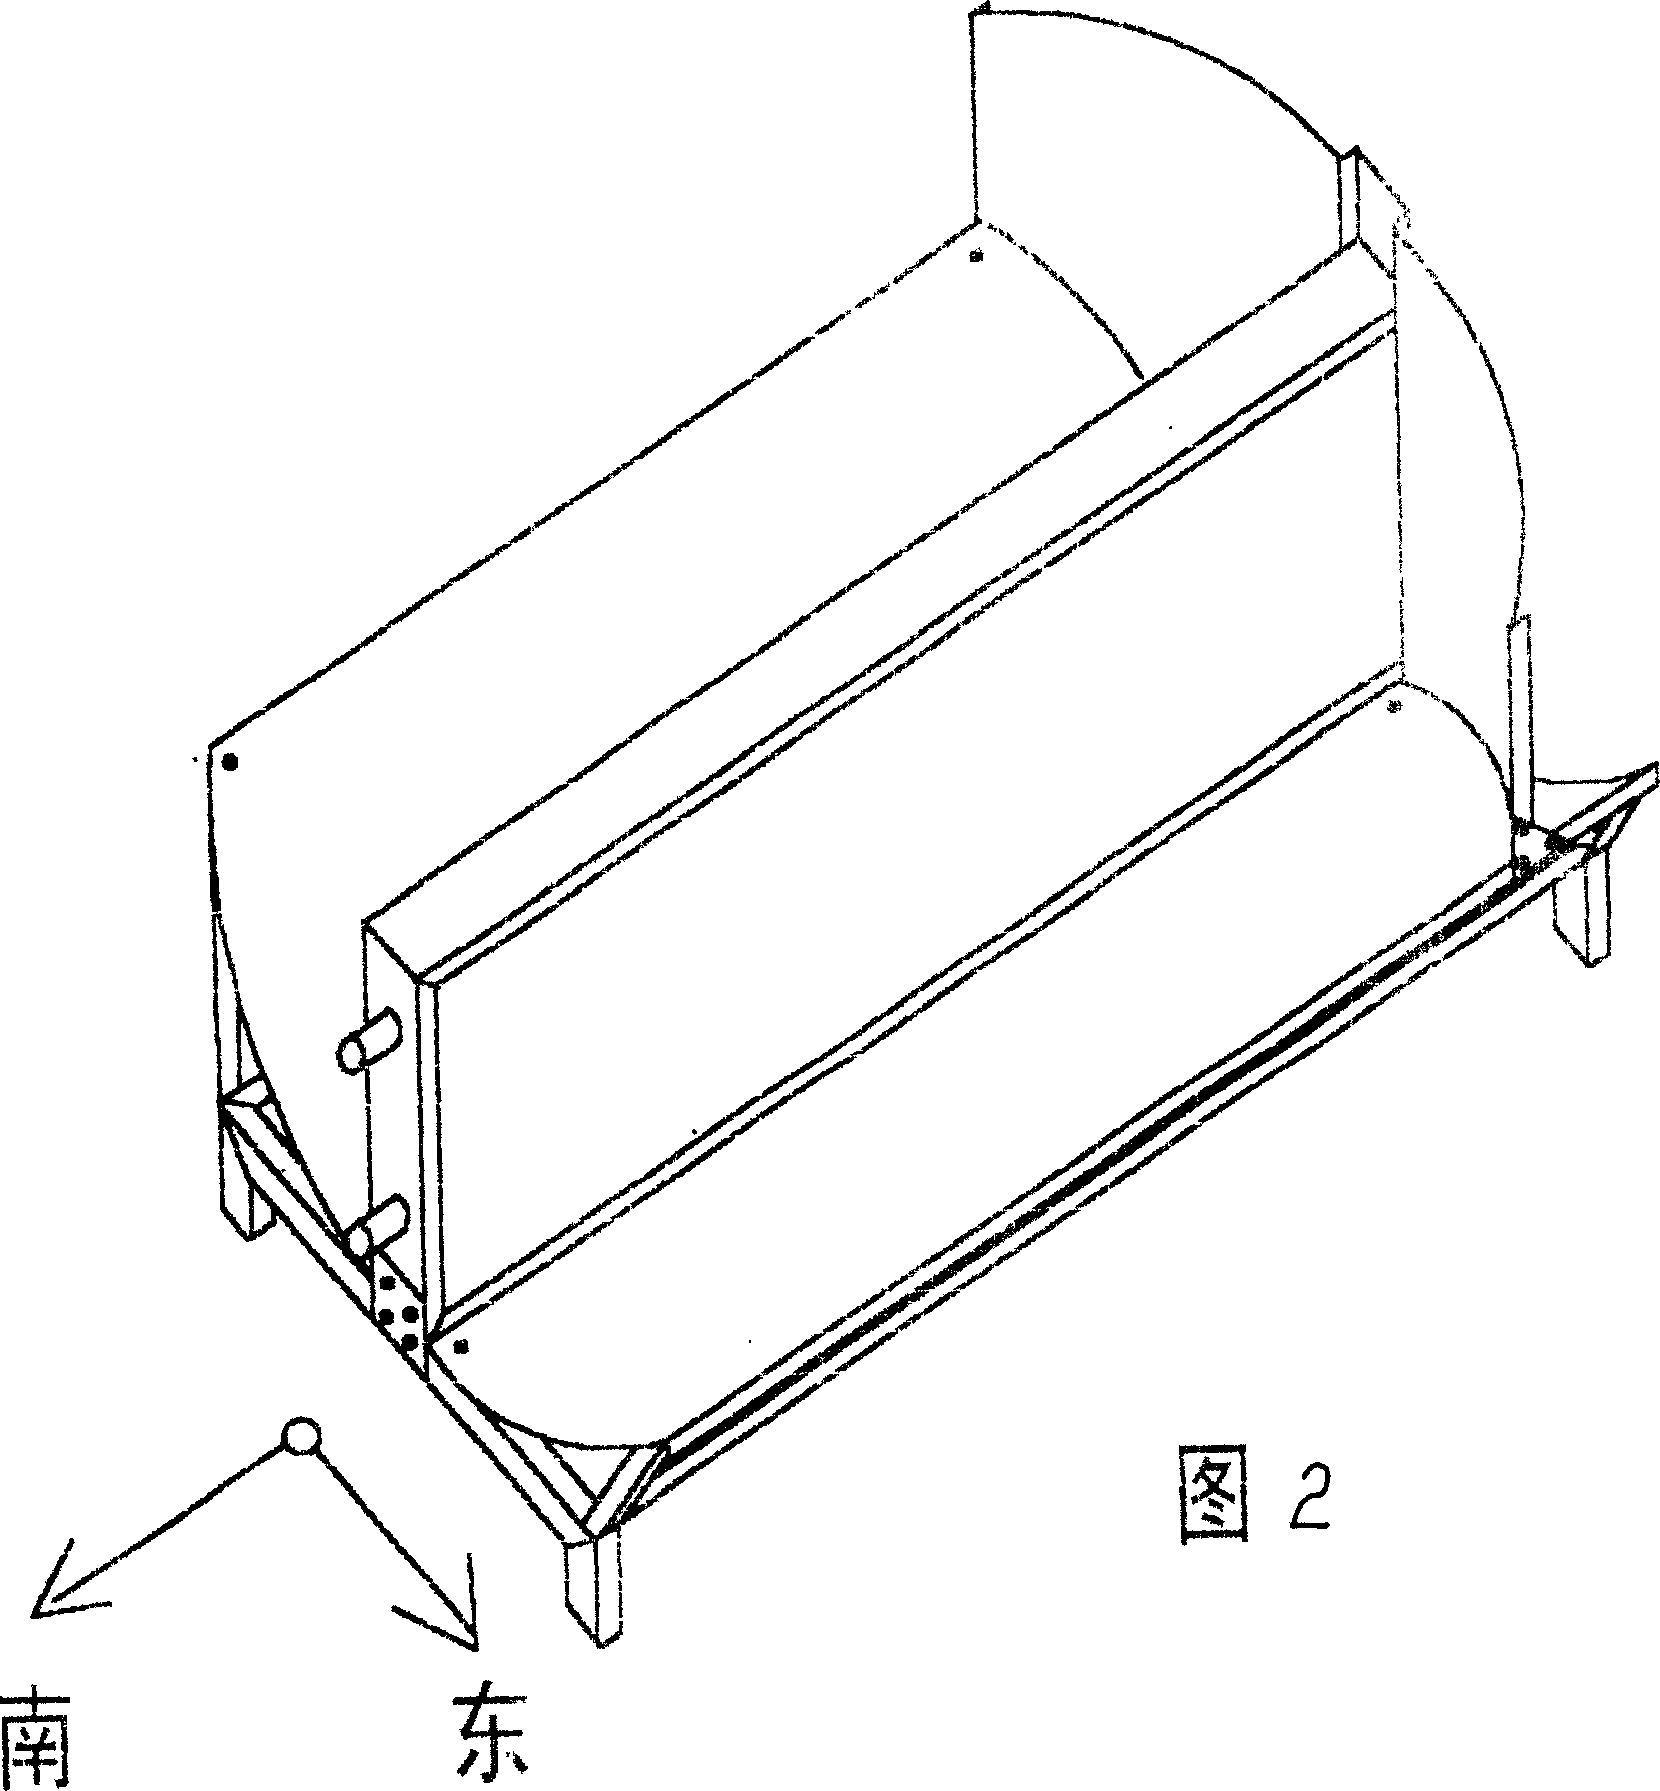 Solar energy three-dimensional concentrating collector